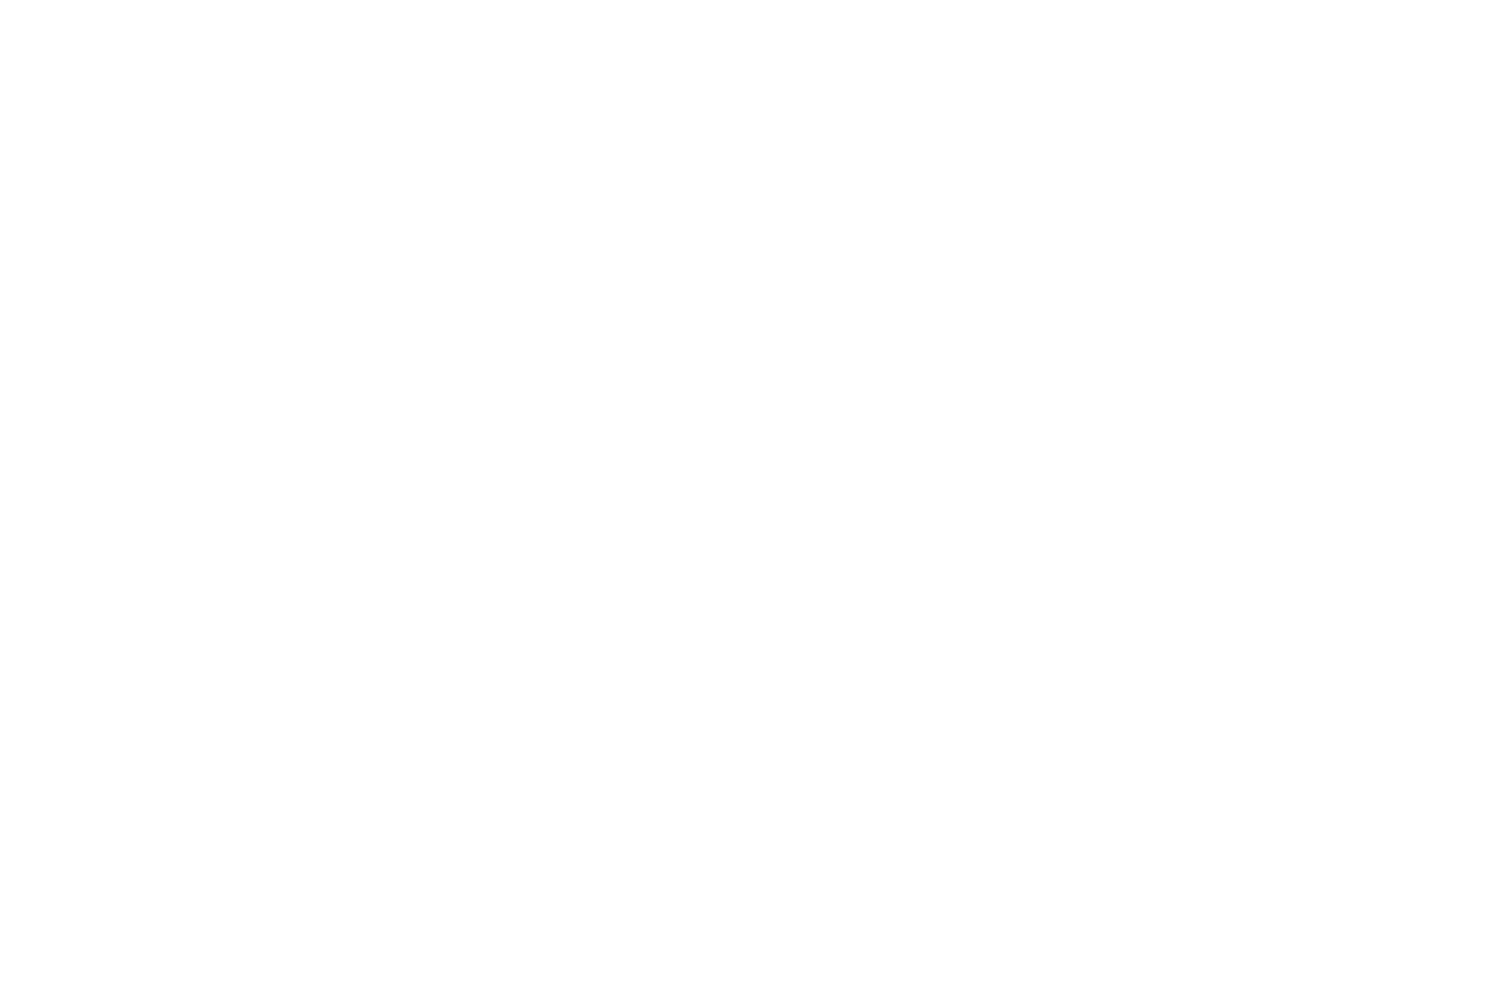 cropped Ascension on the Bayou logo